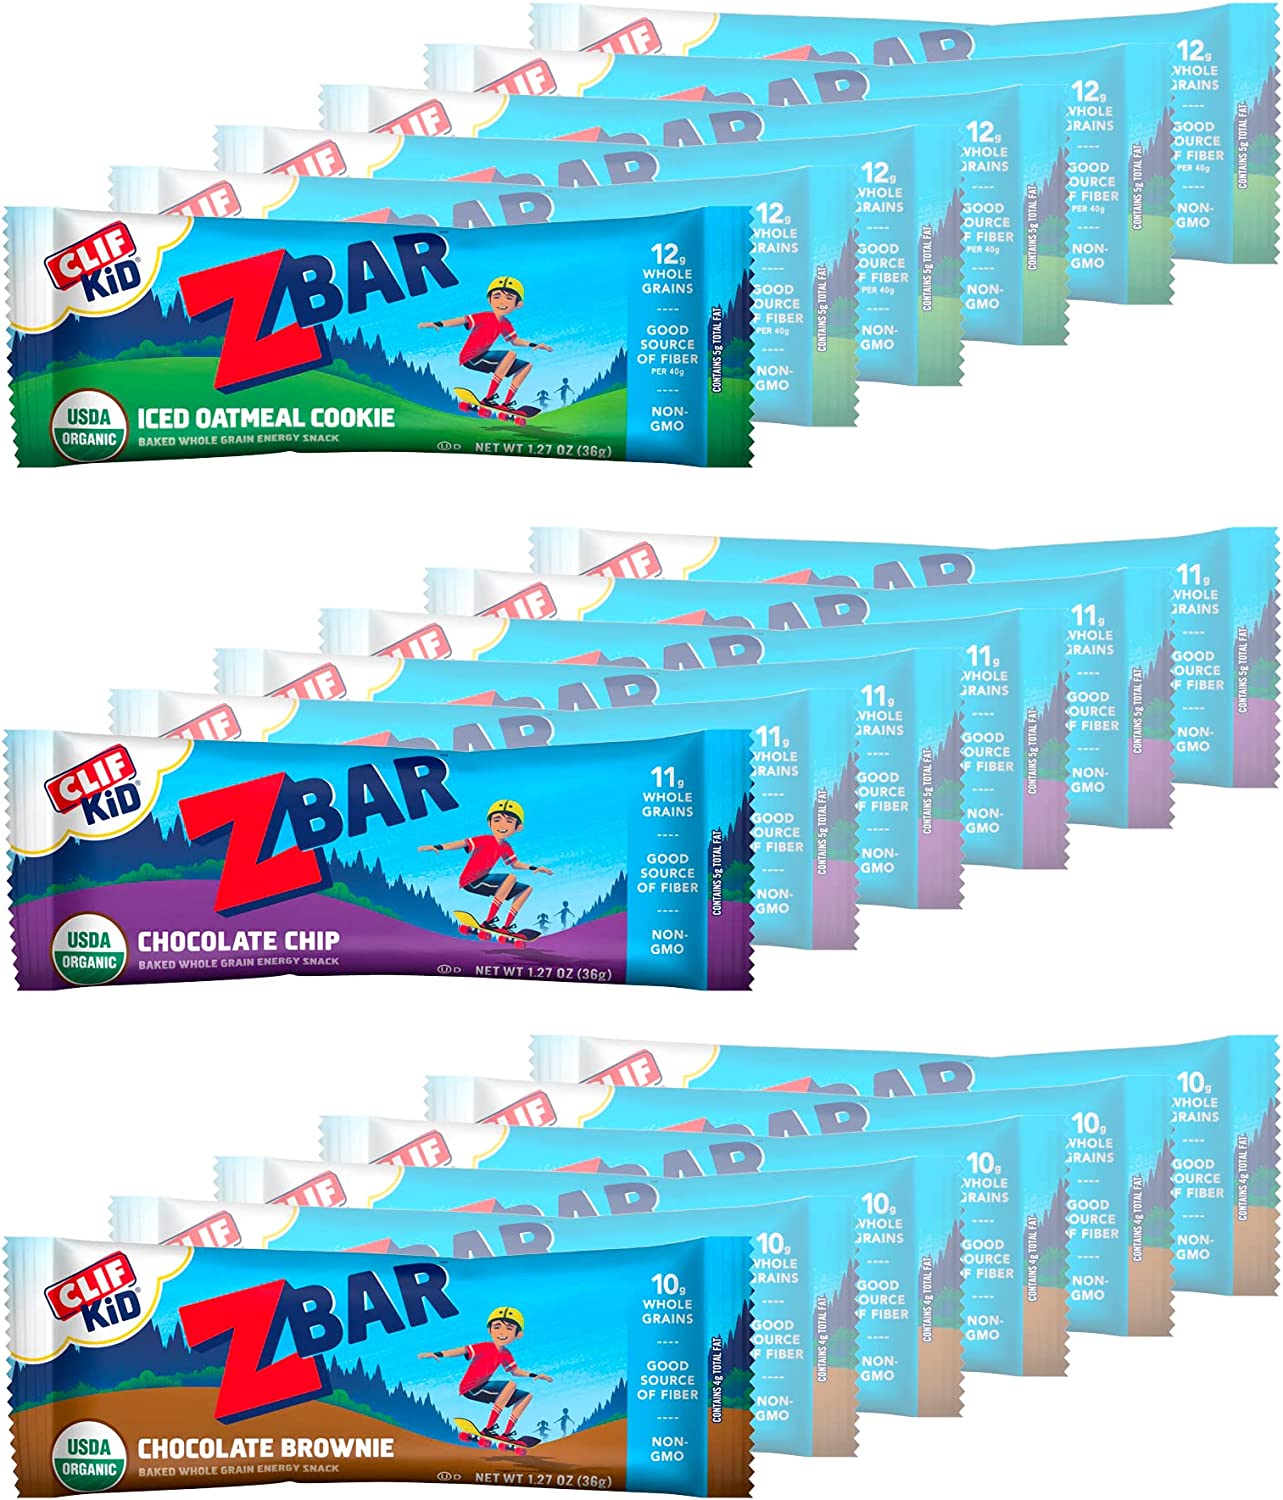 CLIF KID ZBAR – 3-Flavor Variety Pack, Organic Whole Grain Bars, Soft-Baked Energy Snack Bars, Chewy Texture, Smart Snack for Kids, Good Source of Fiber, Non-GMO (1.27 oz per bar, 18 Count)